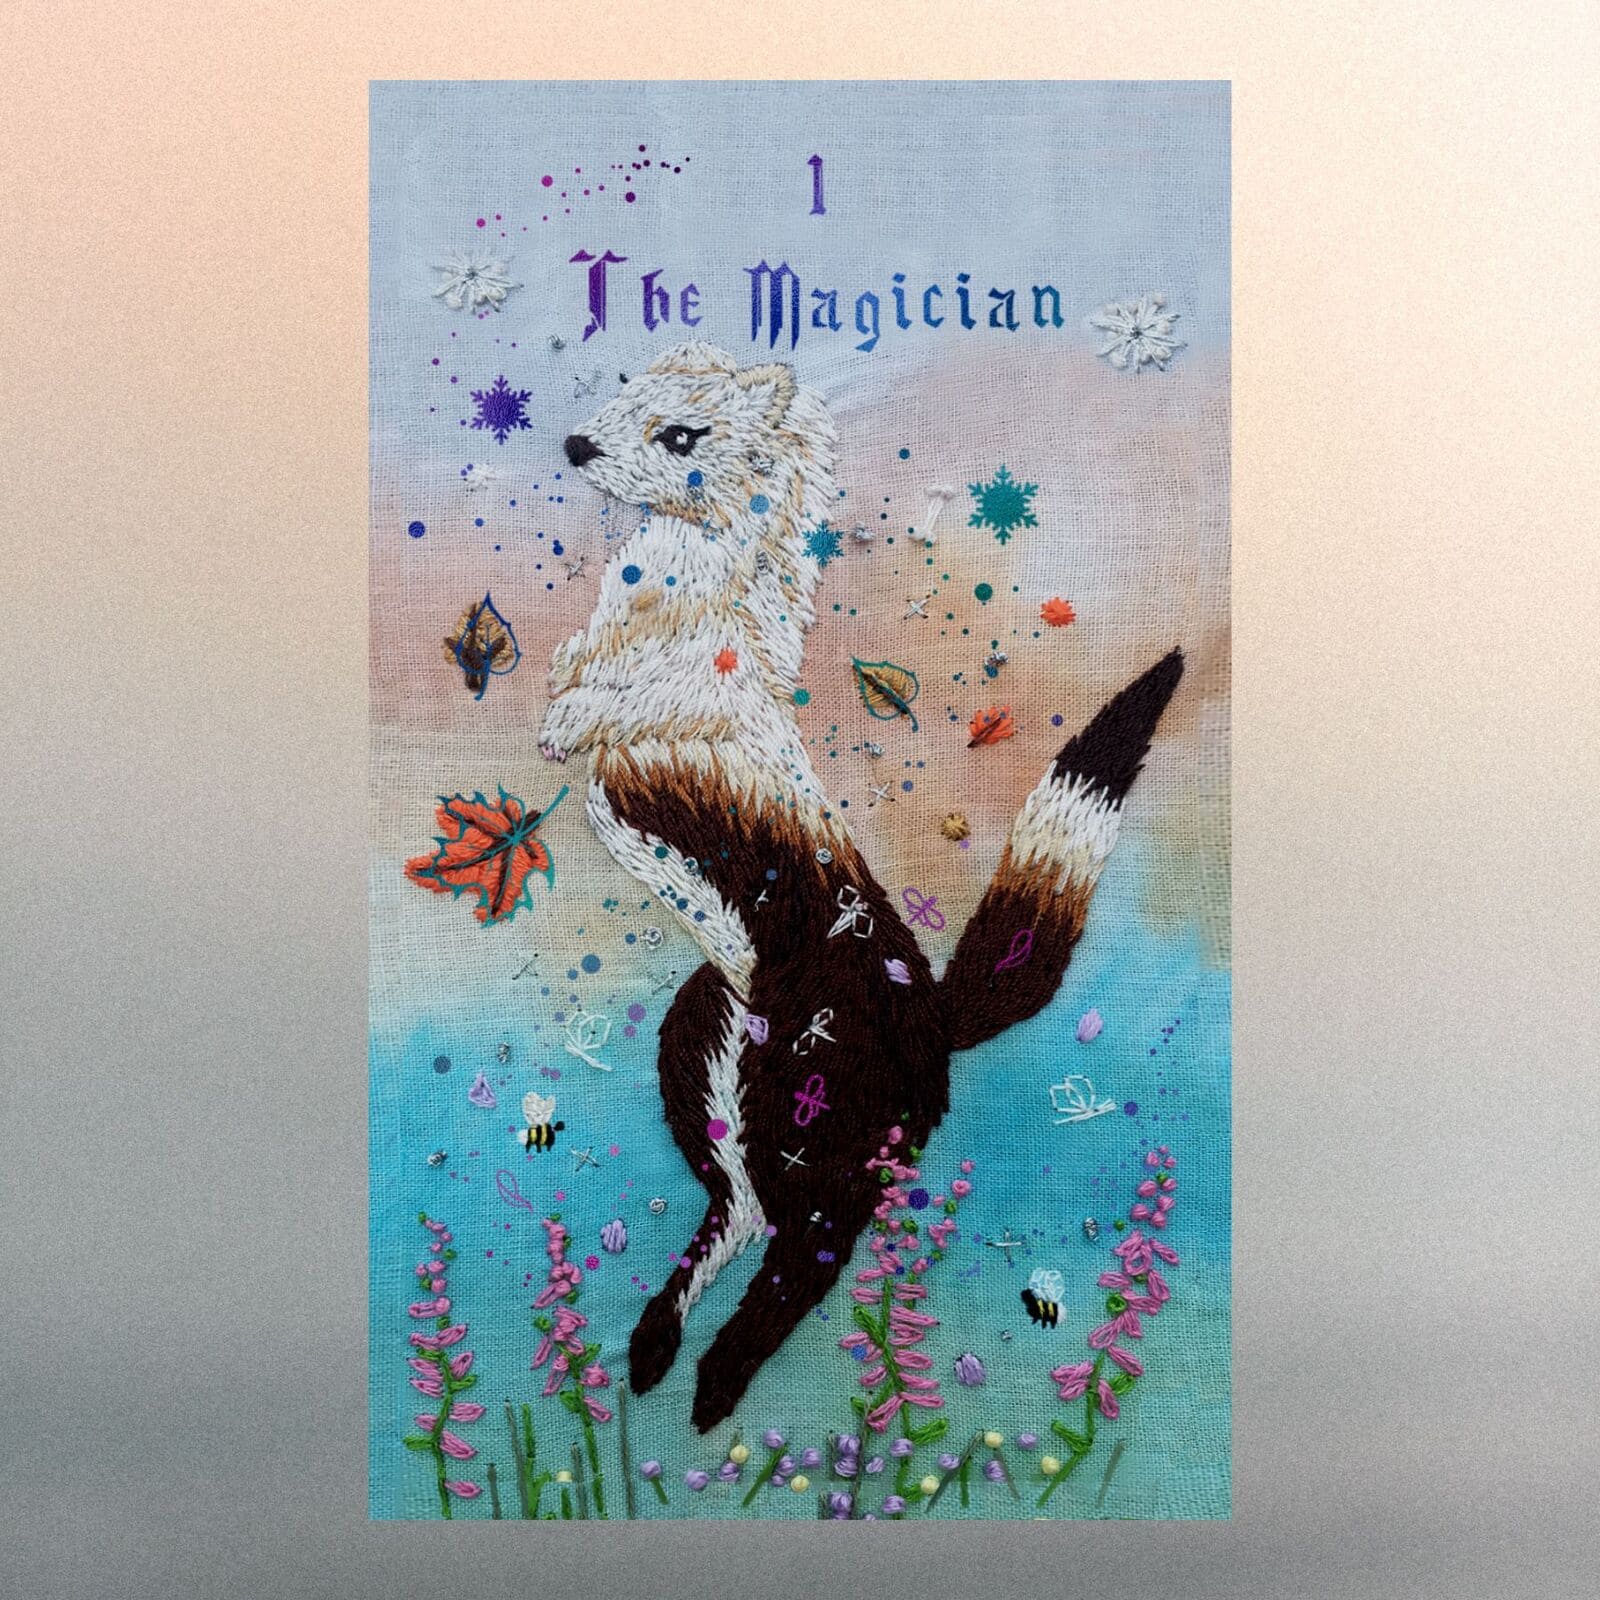 Magician Tarot Card Meaning - Upright, Reversed & More The Embroidered Forest